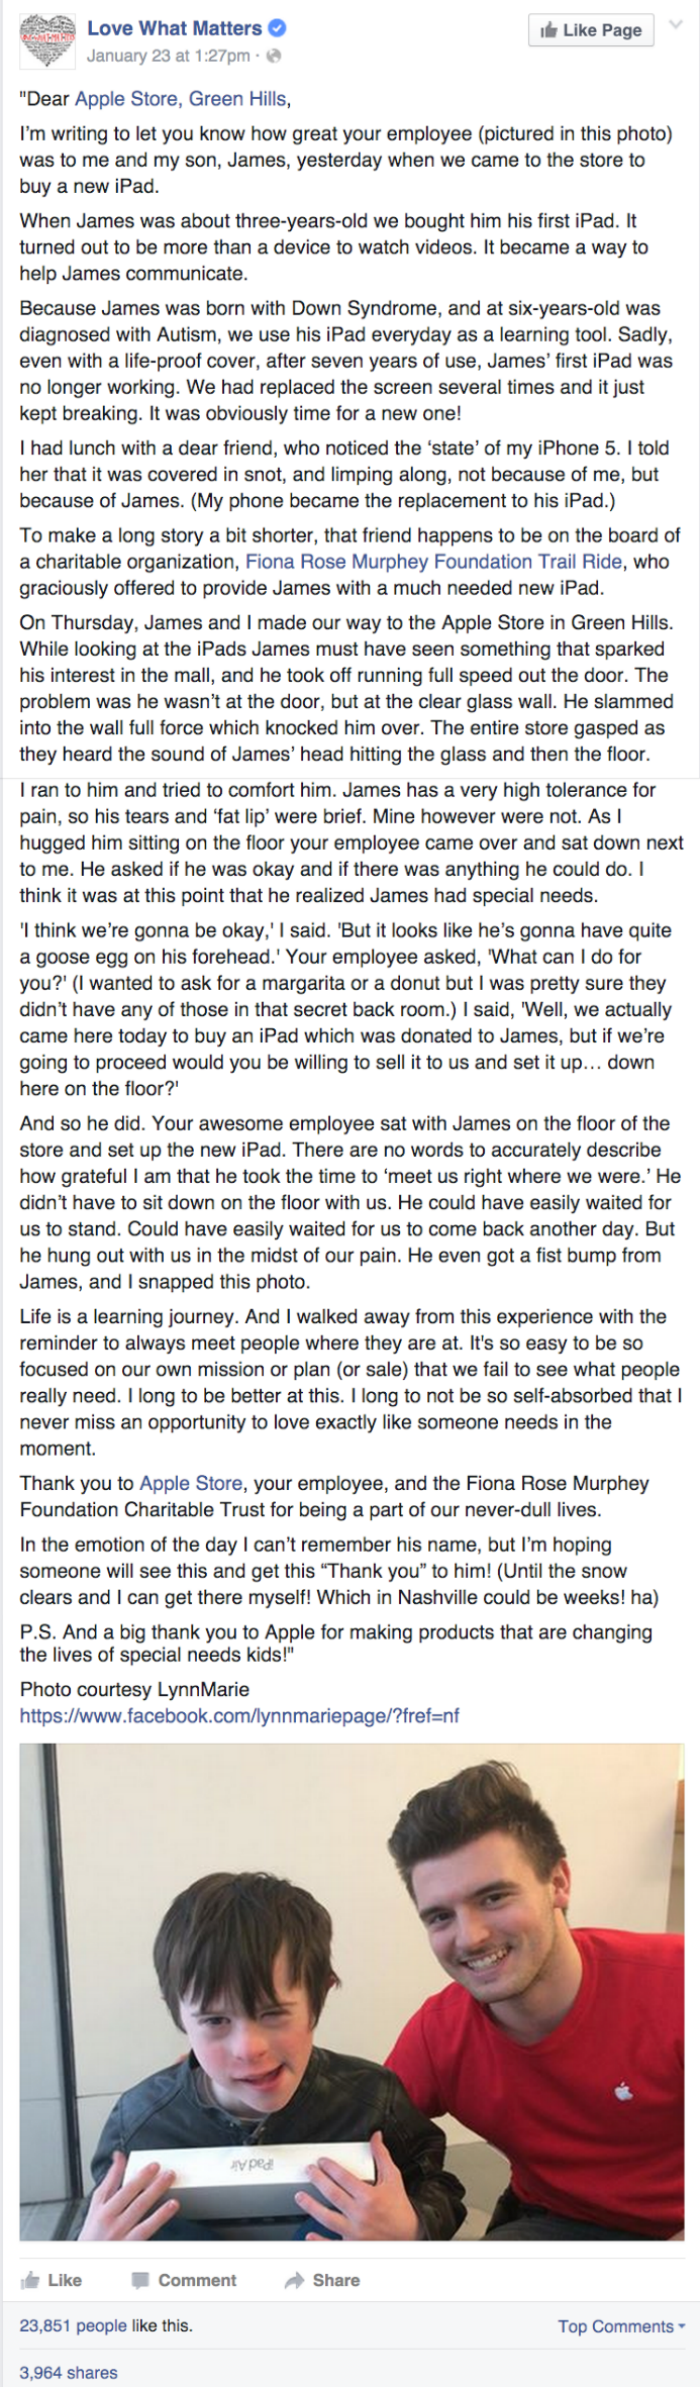 heartwarming parenting facebook post about patient and kind apple store employee